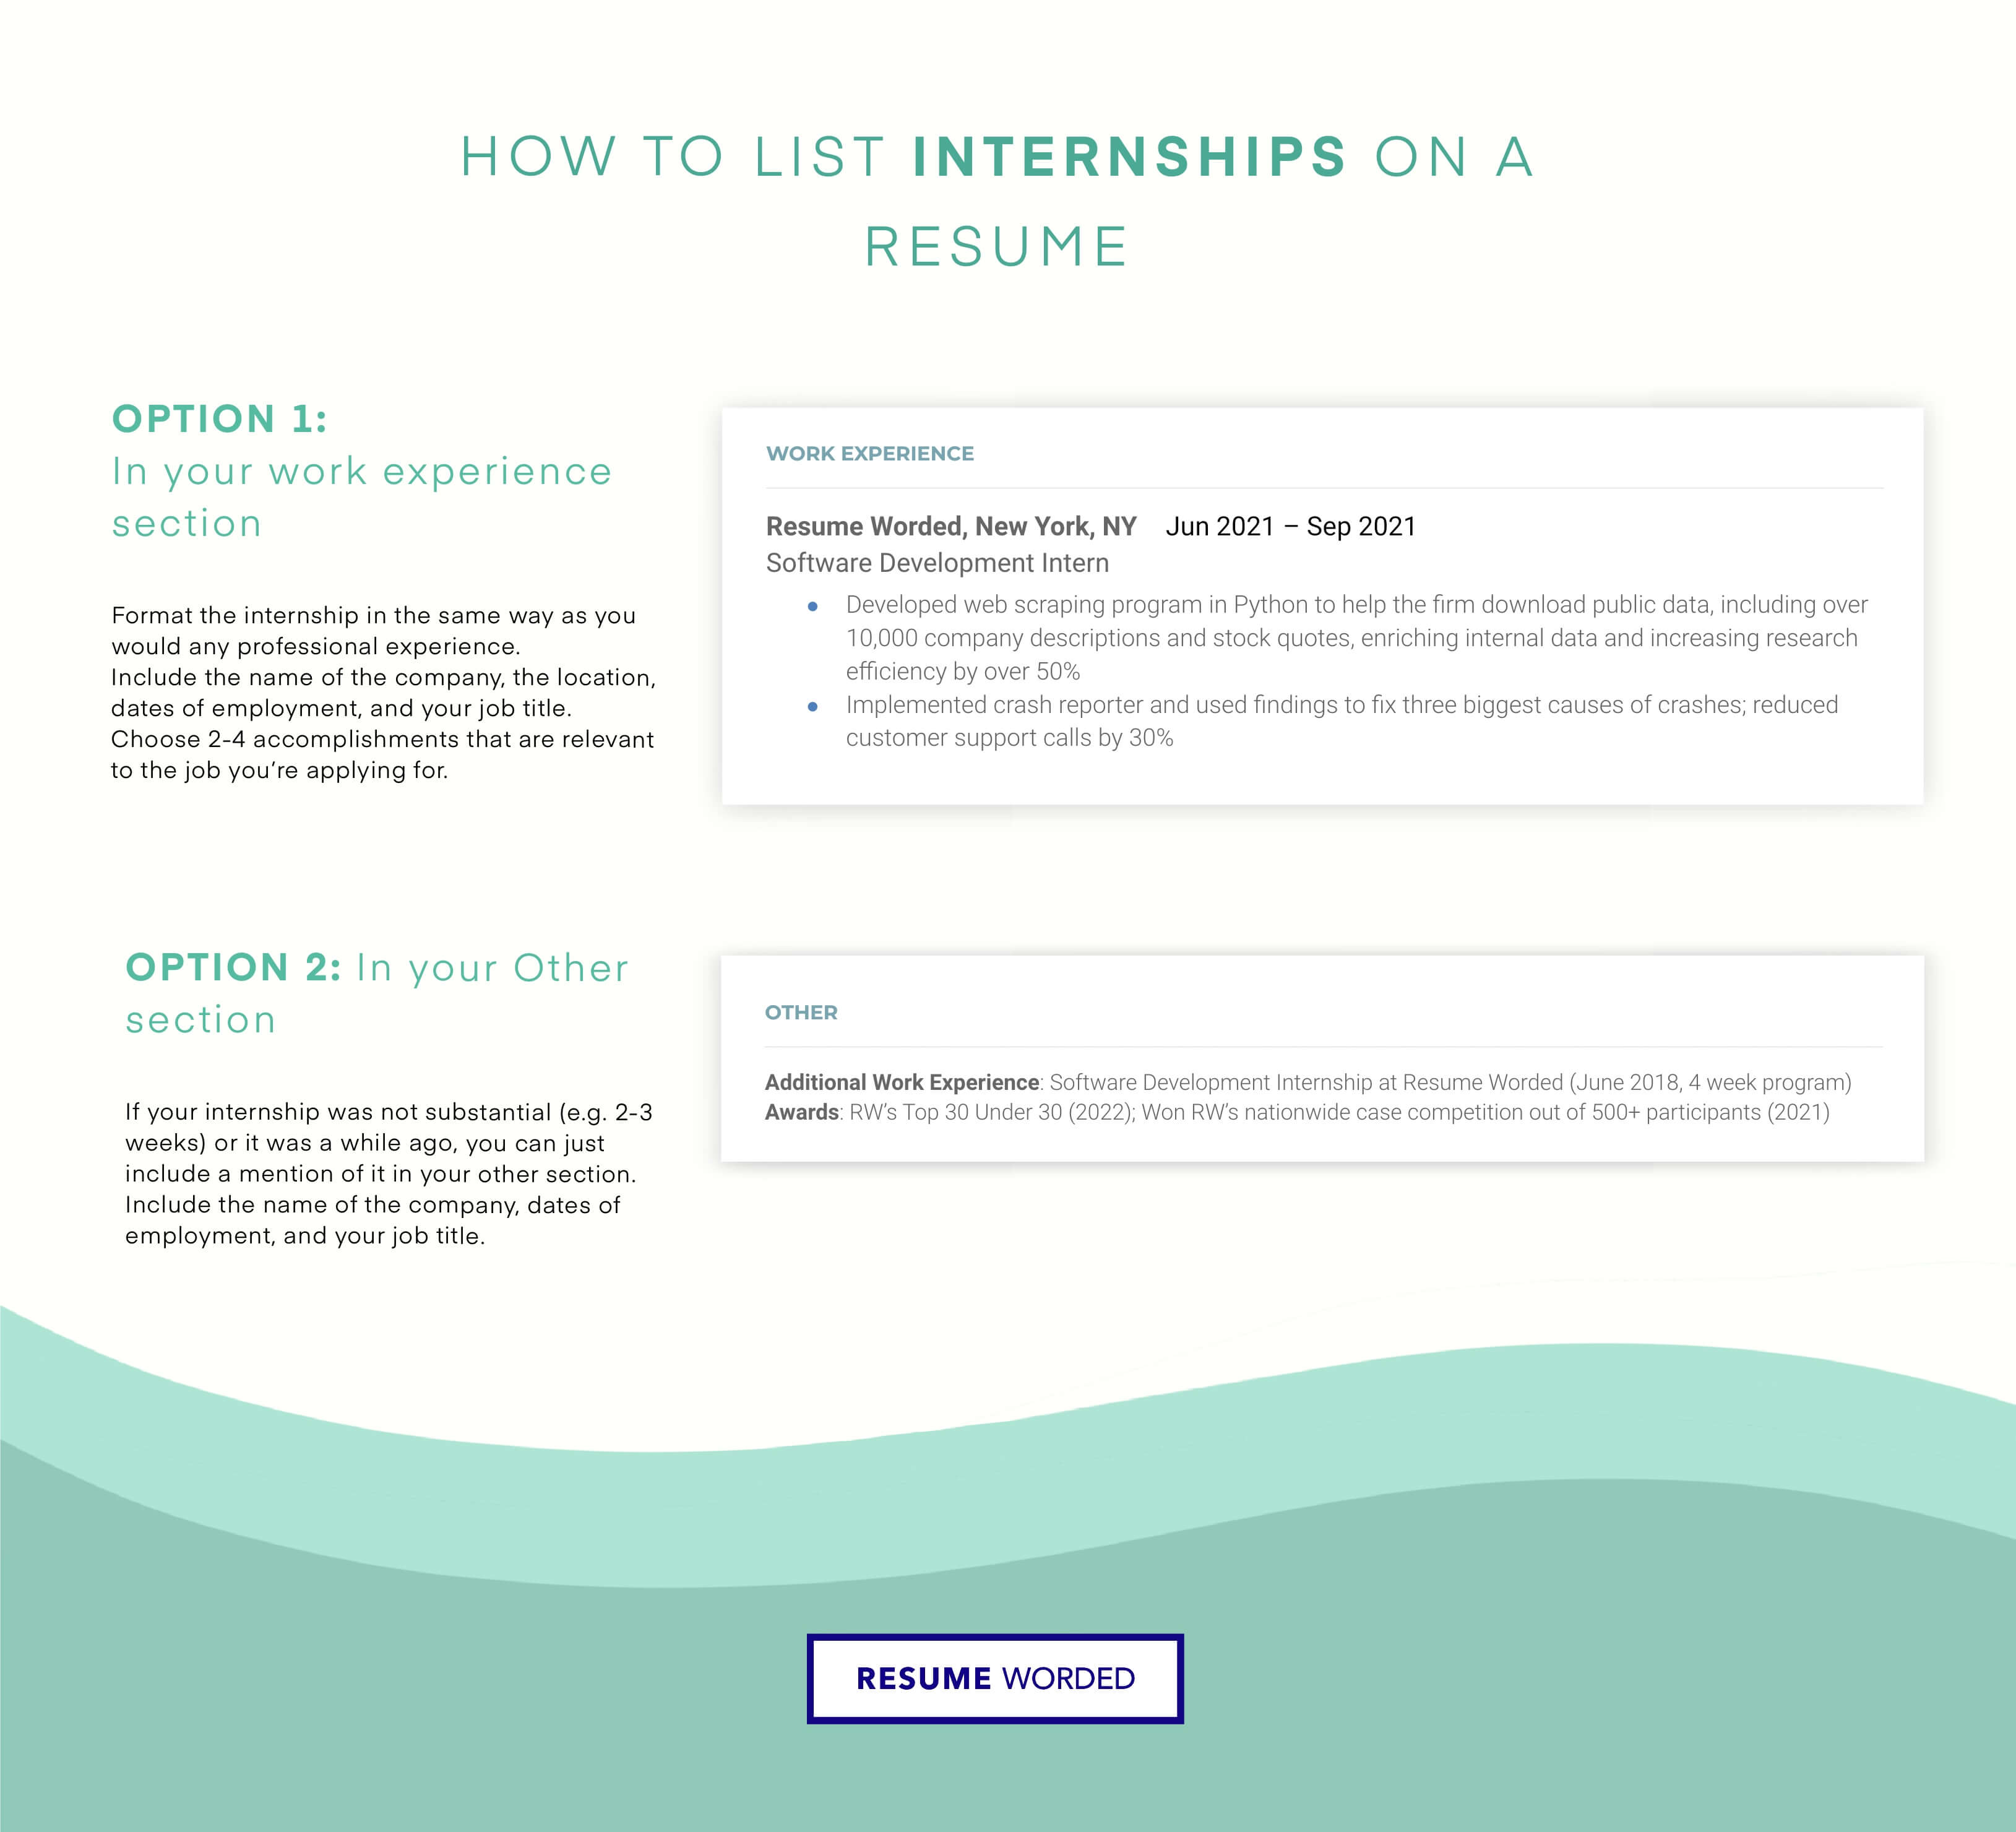 Earn law experience as a court intern or paralegal - Lawyer Resume